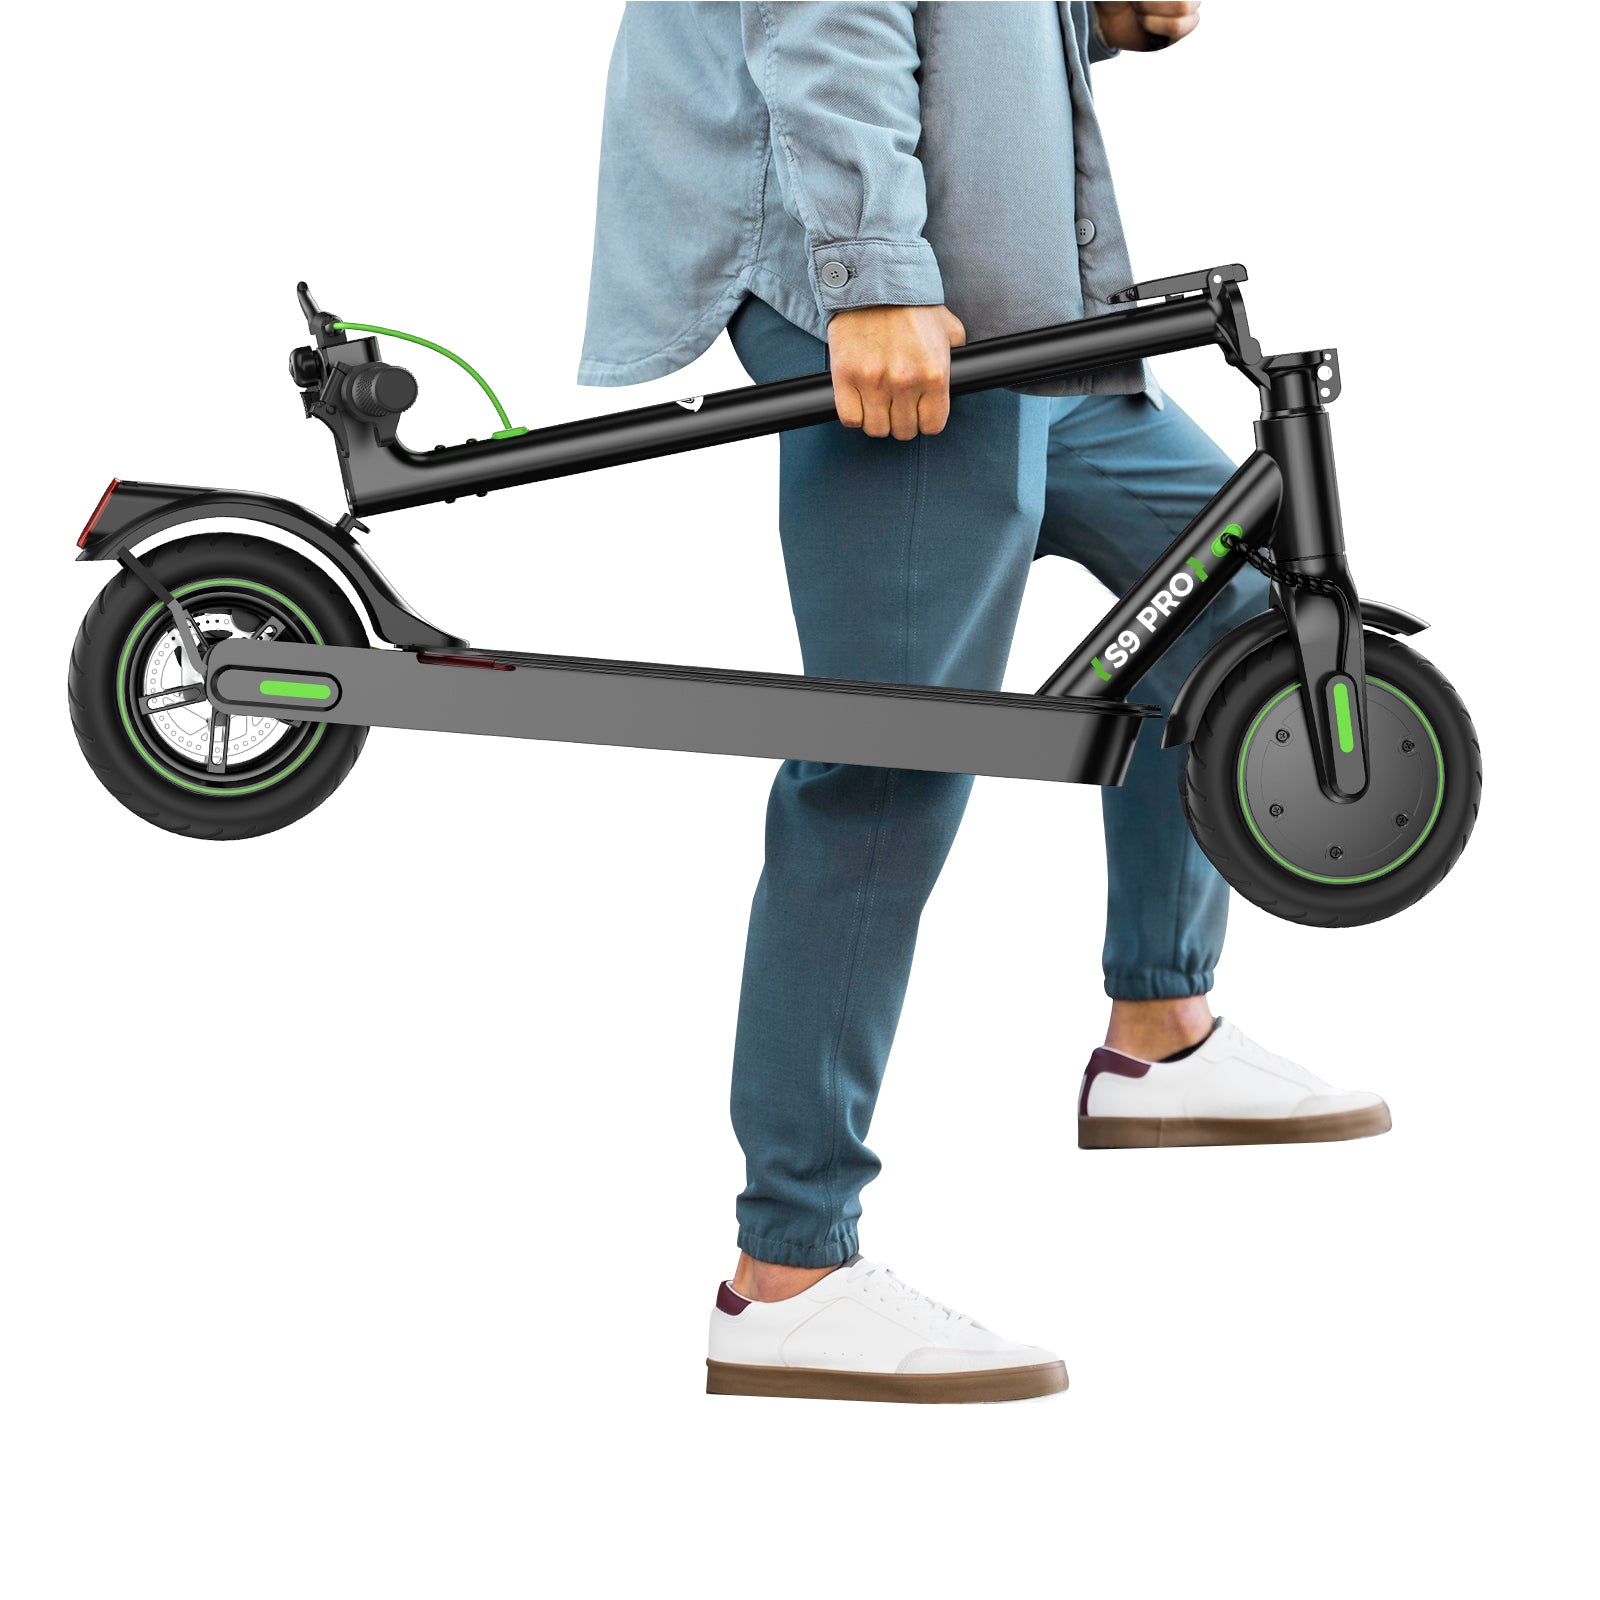 isinwheel S9 Pro Pneumatic Tire Electric Scooter Carry